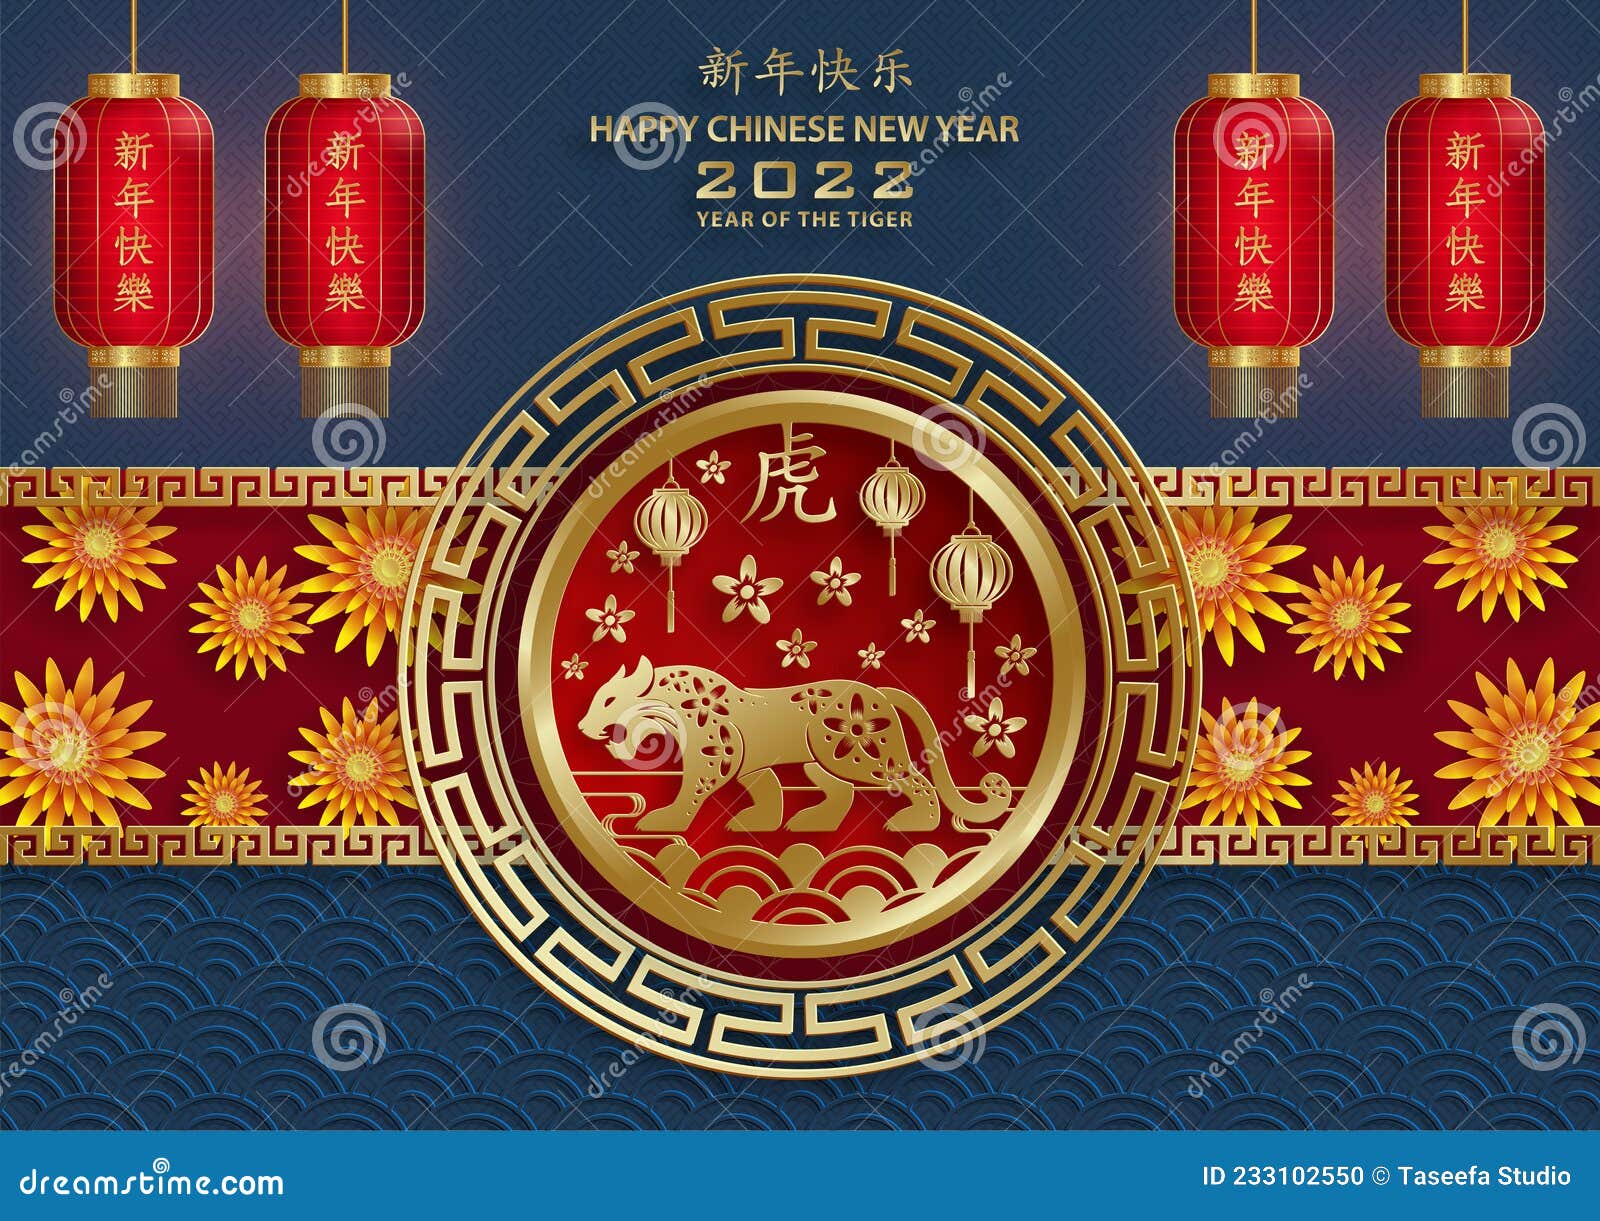 Wallpaper chinese new year 2022 Download Free